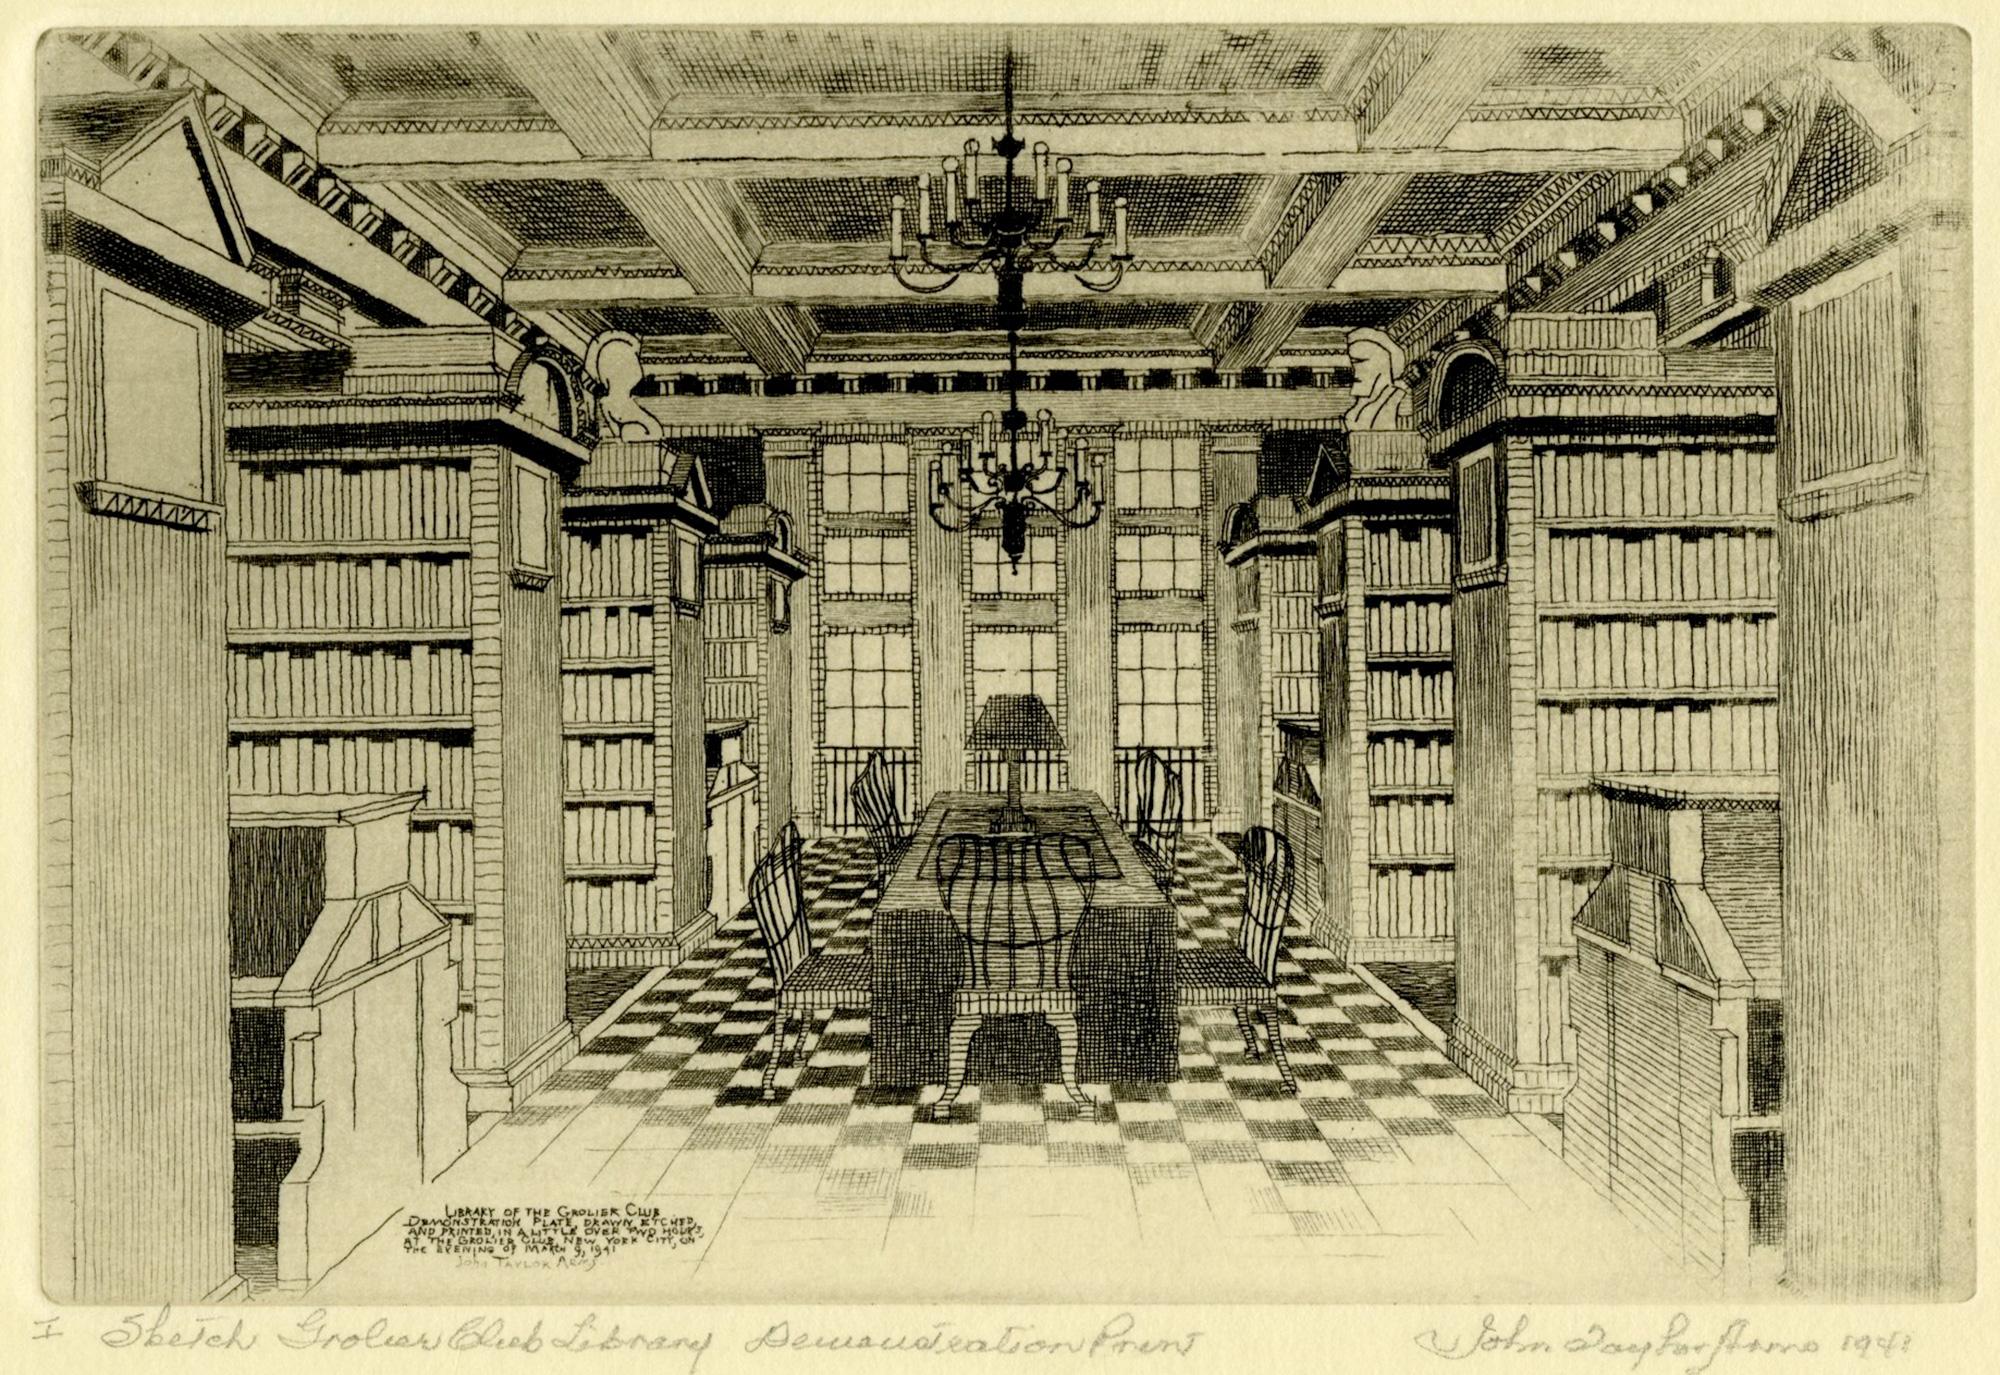 John Taylor Arms Figurative Print - The Grolier Club Library (Sketch) 